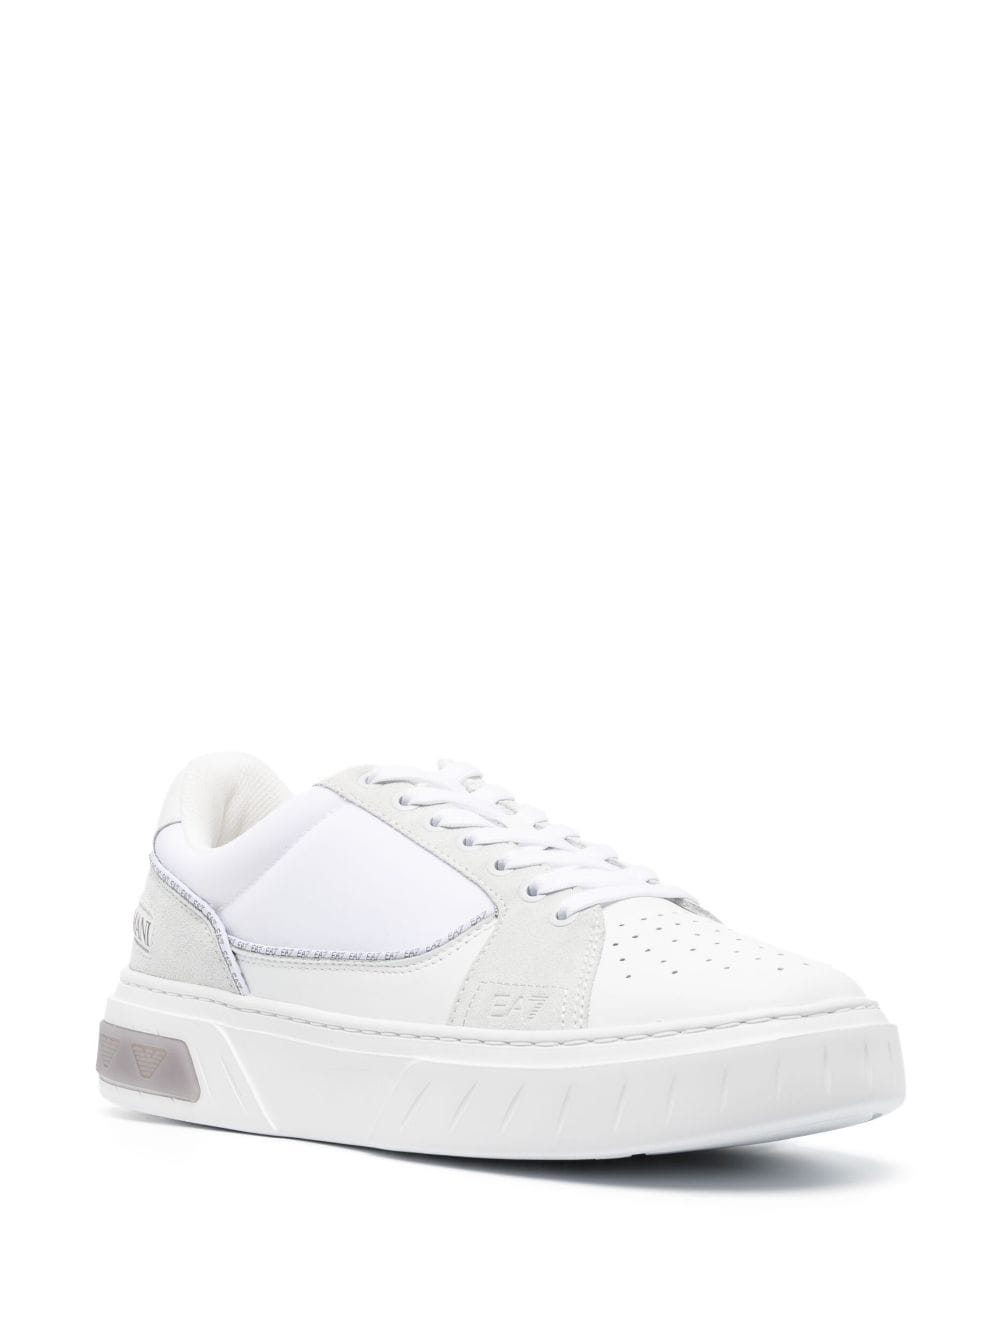 Ea7 Embossed-logo Leather Sneakers In White | ModeSens